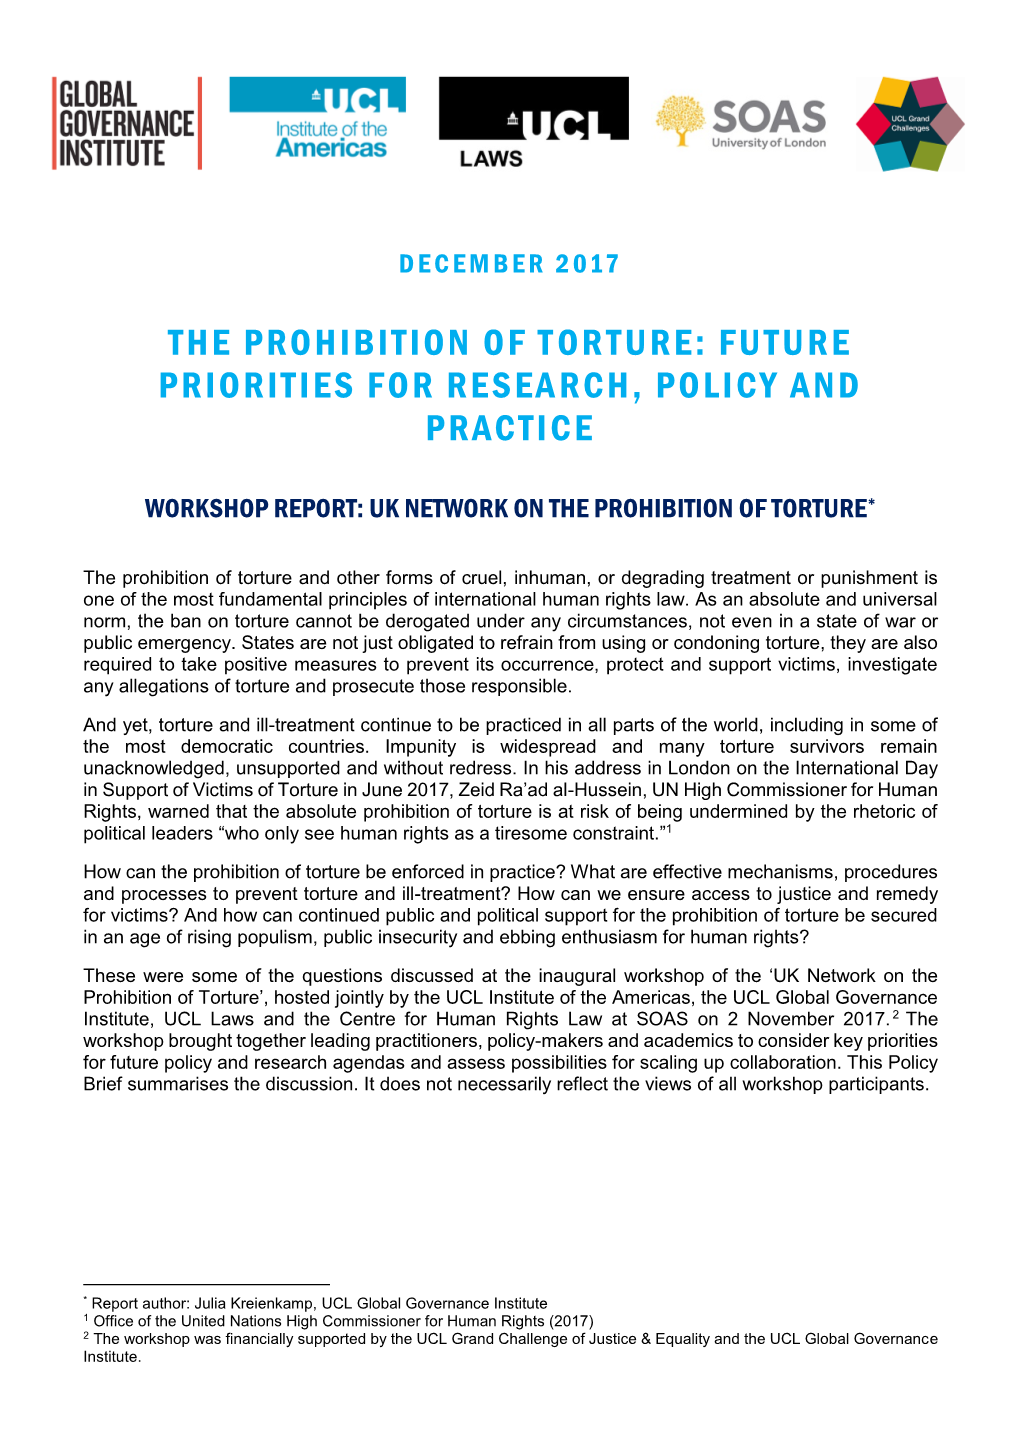 The Prohibition of Torture: Future Priorities for Research, Policy and Practice